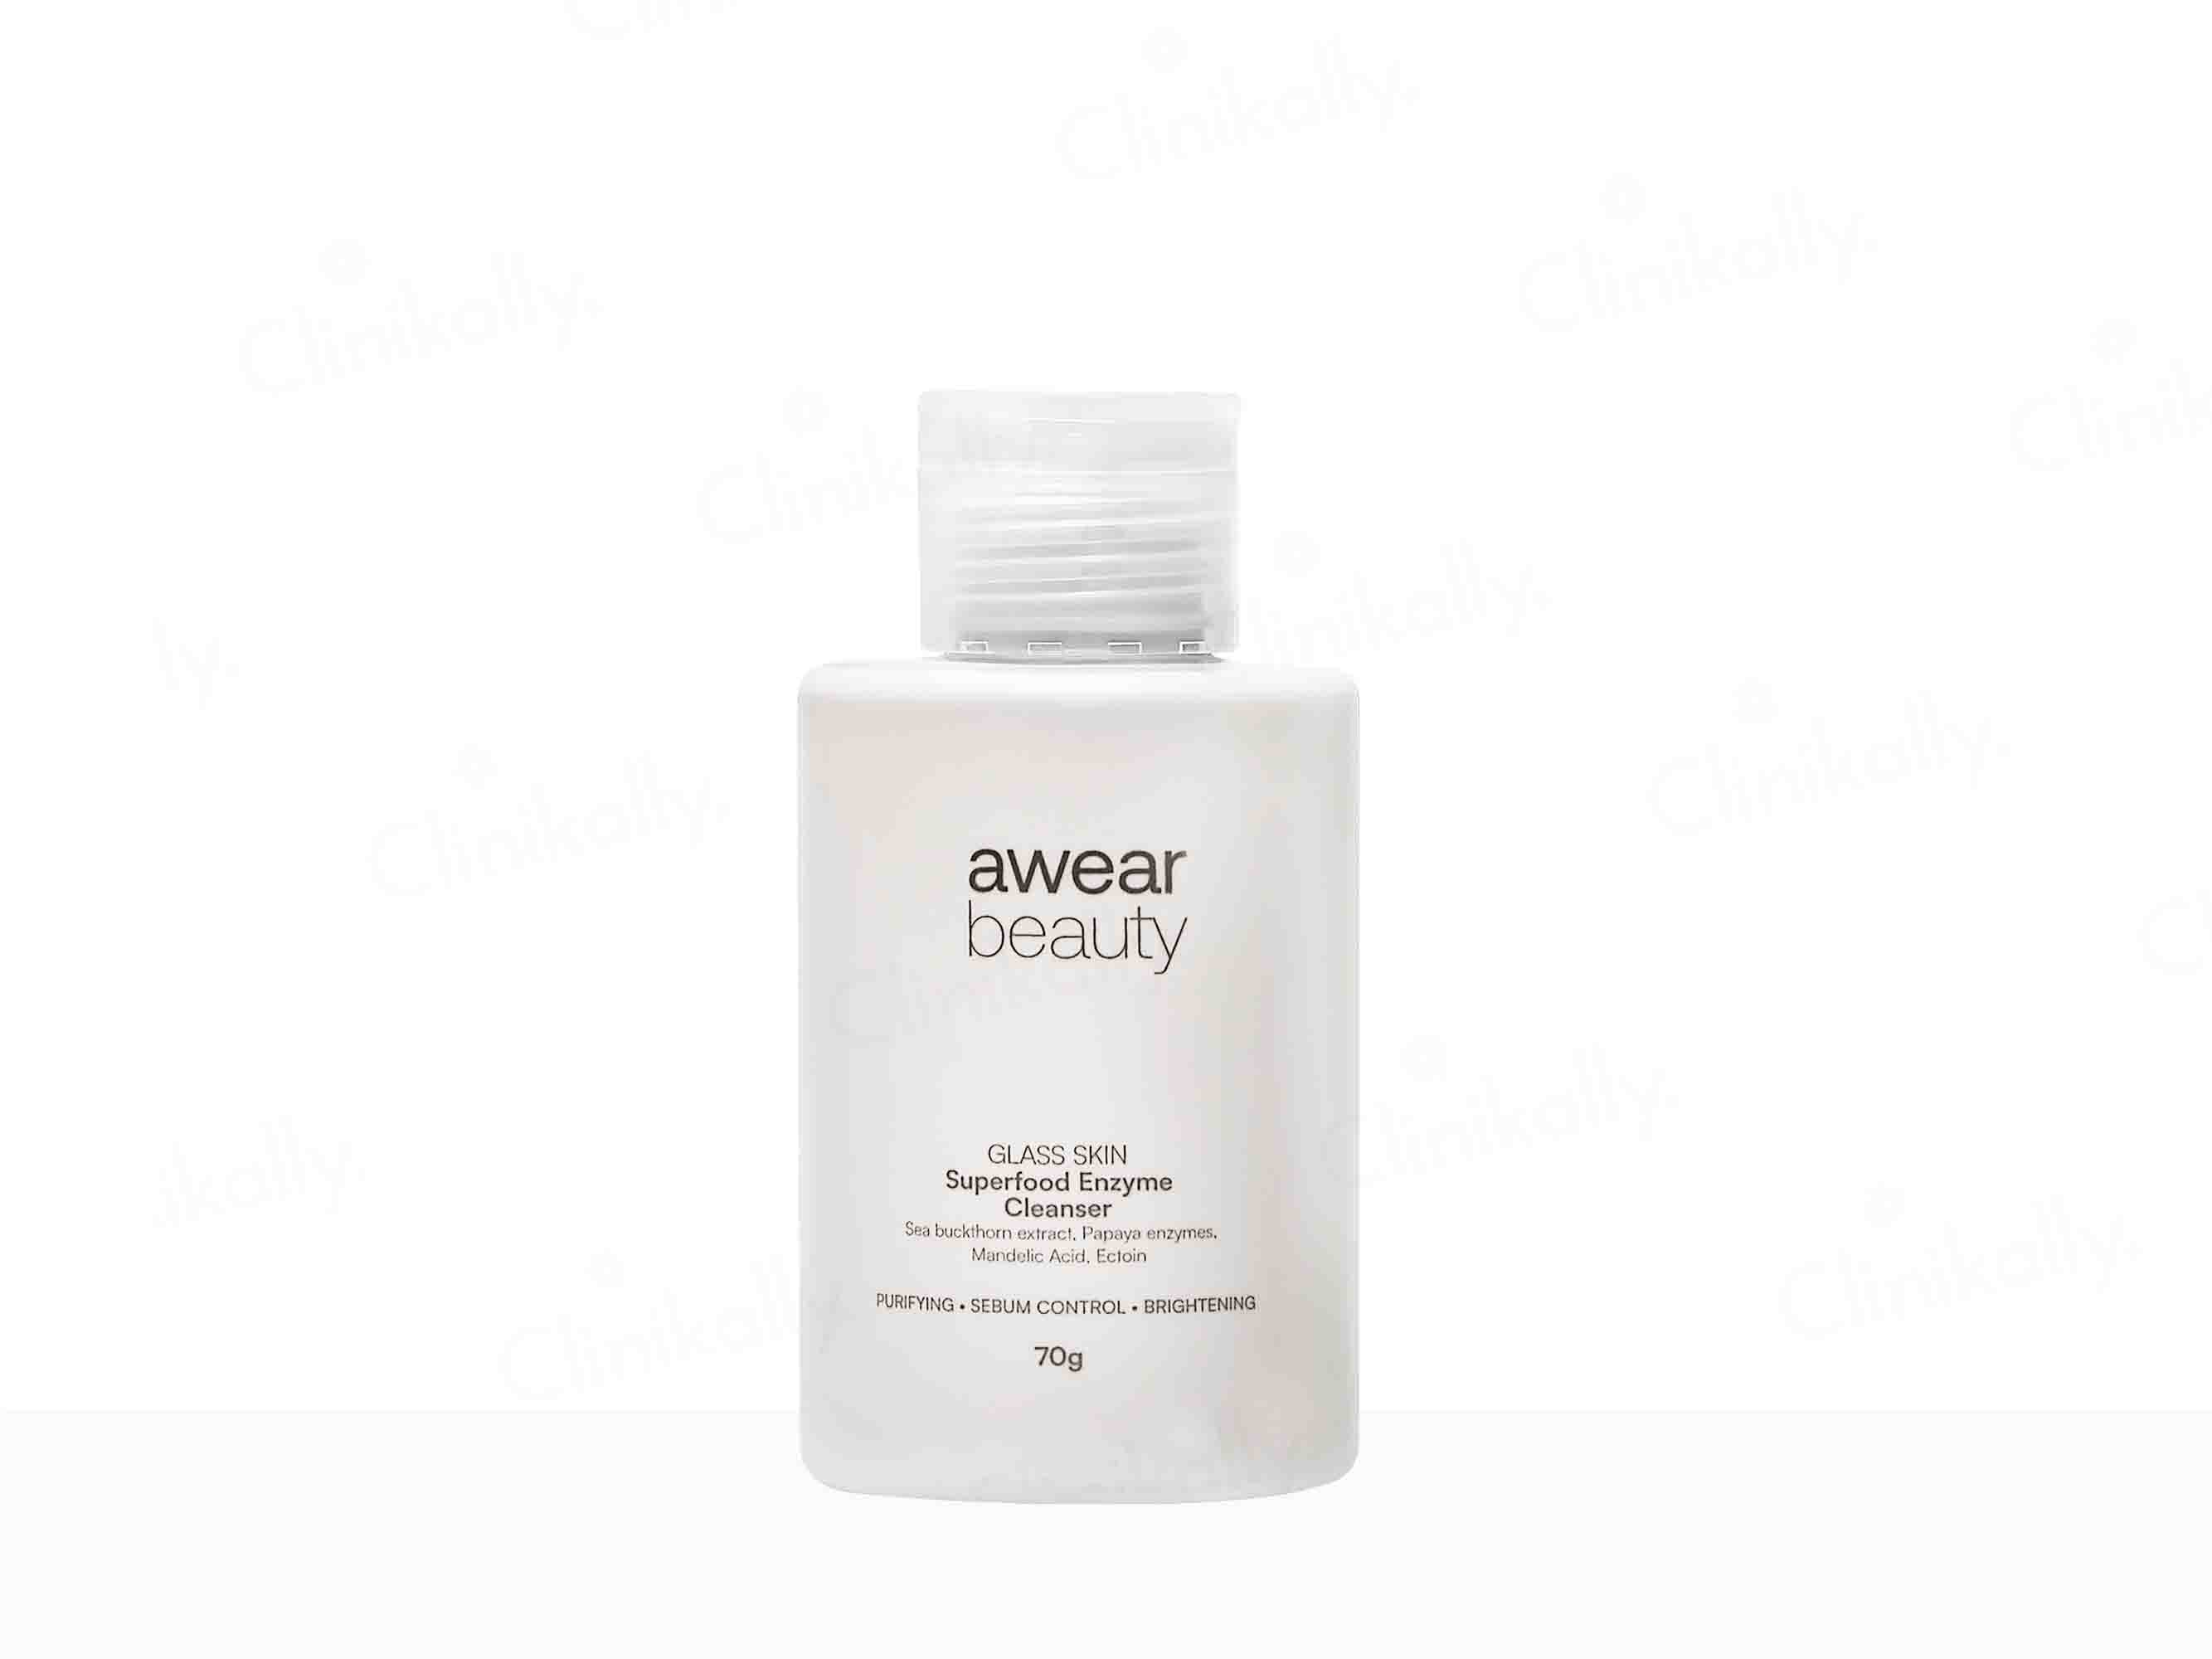 Awear Beauty Glass Skin Superfood Enzyme Cleanser